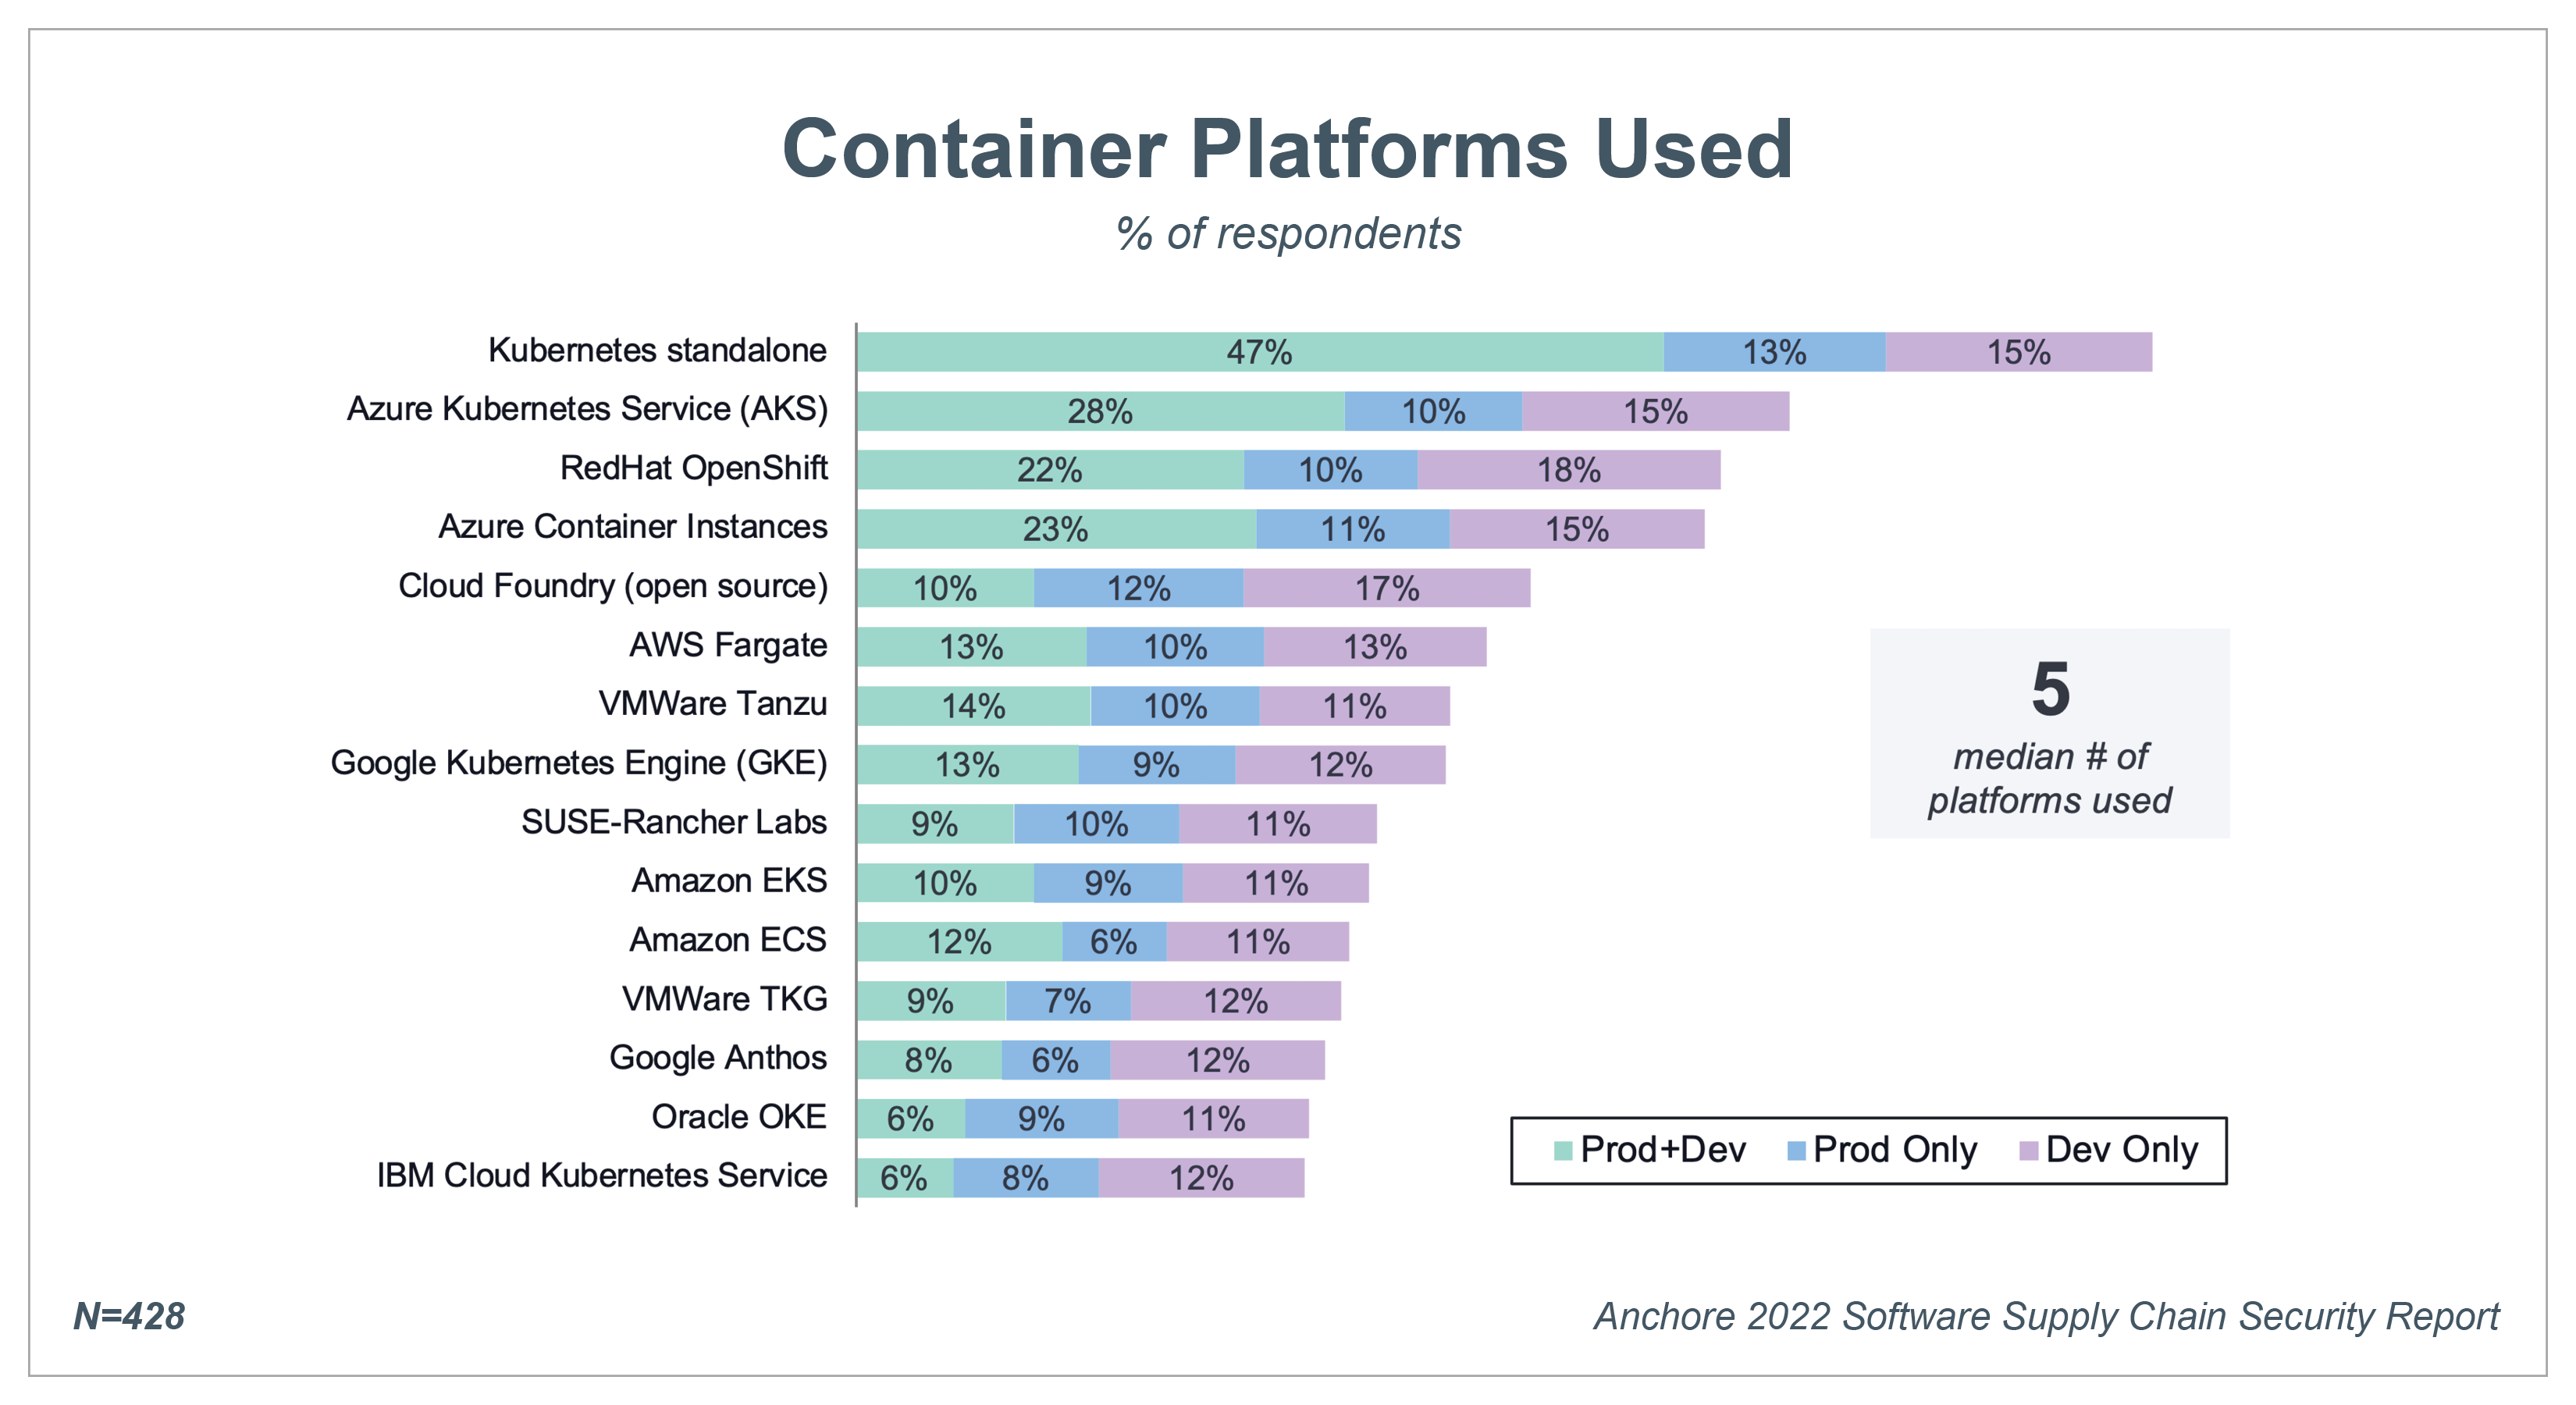 Bar chart showing a breakdown of top container platforms used